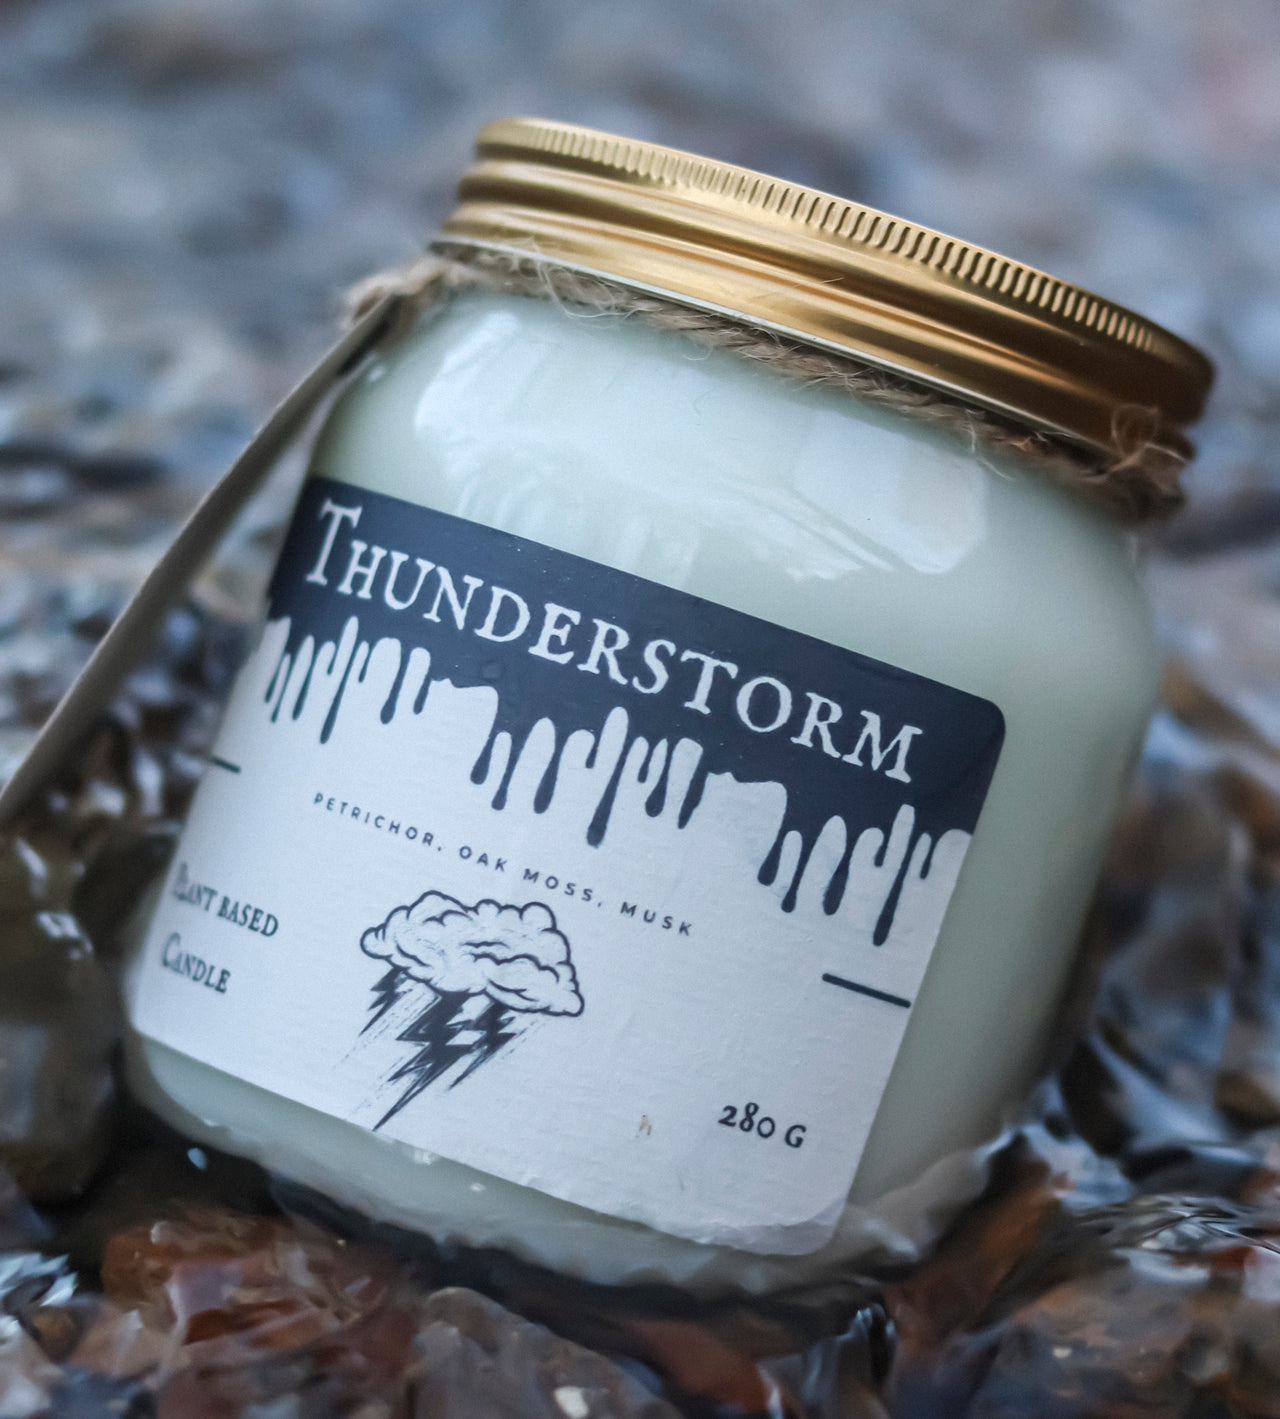 Thunderstorm Candle